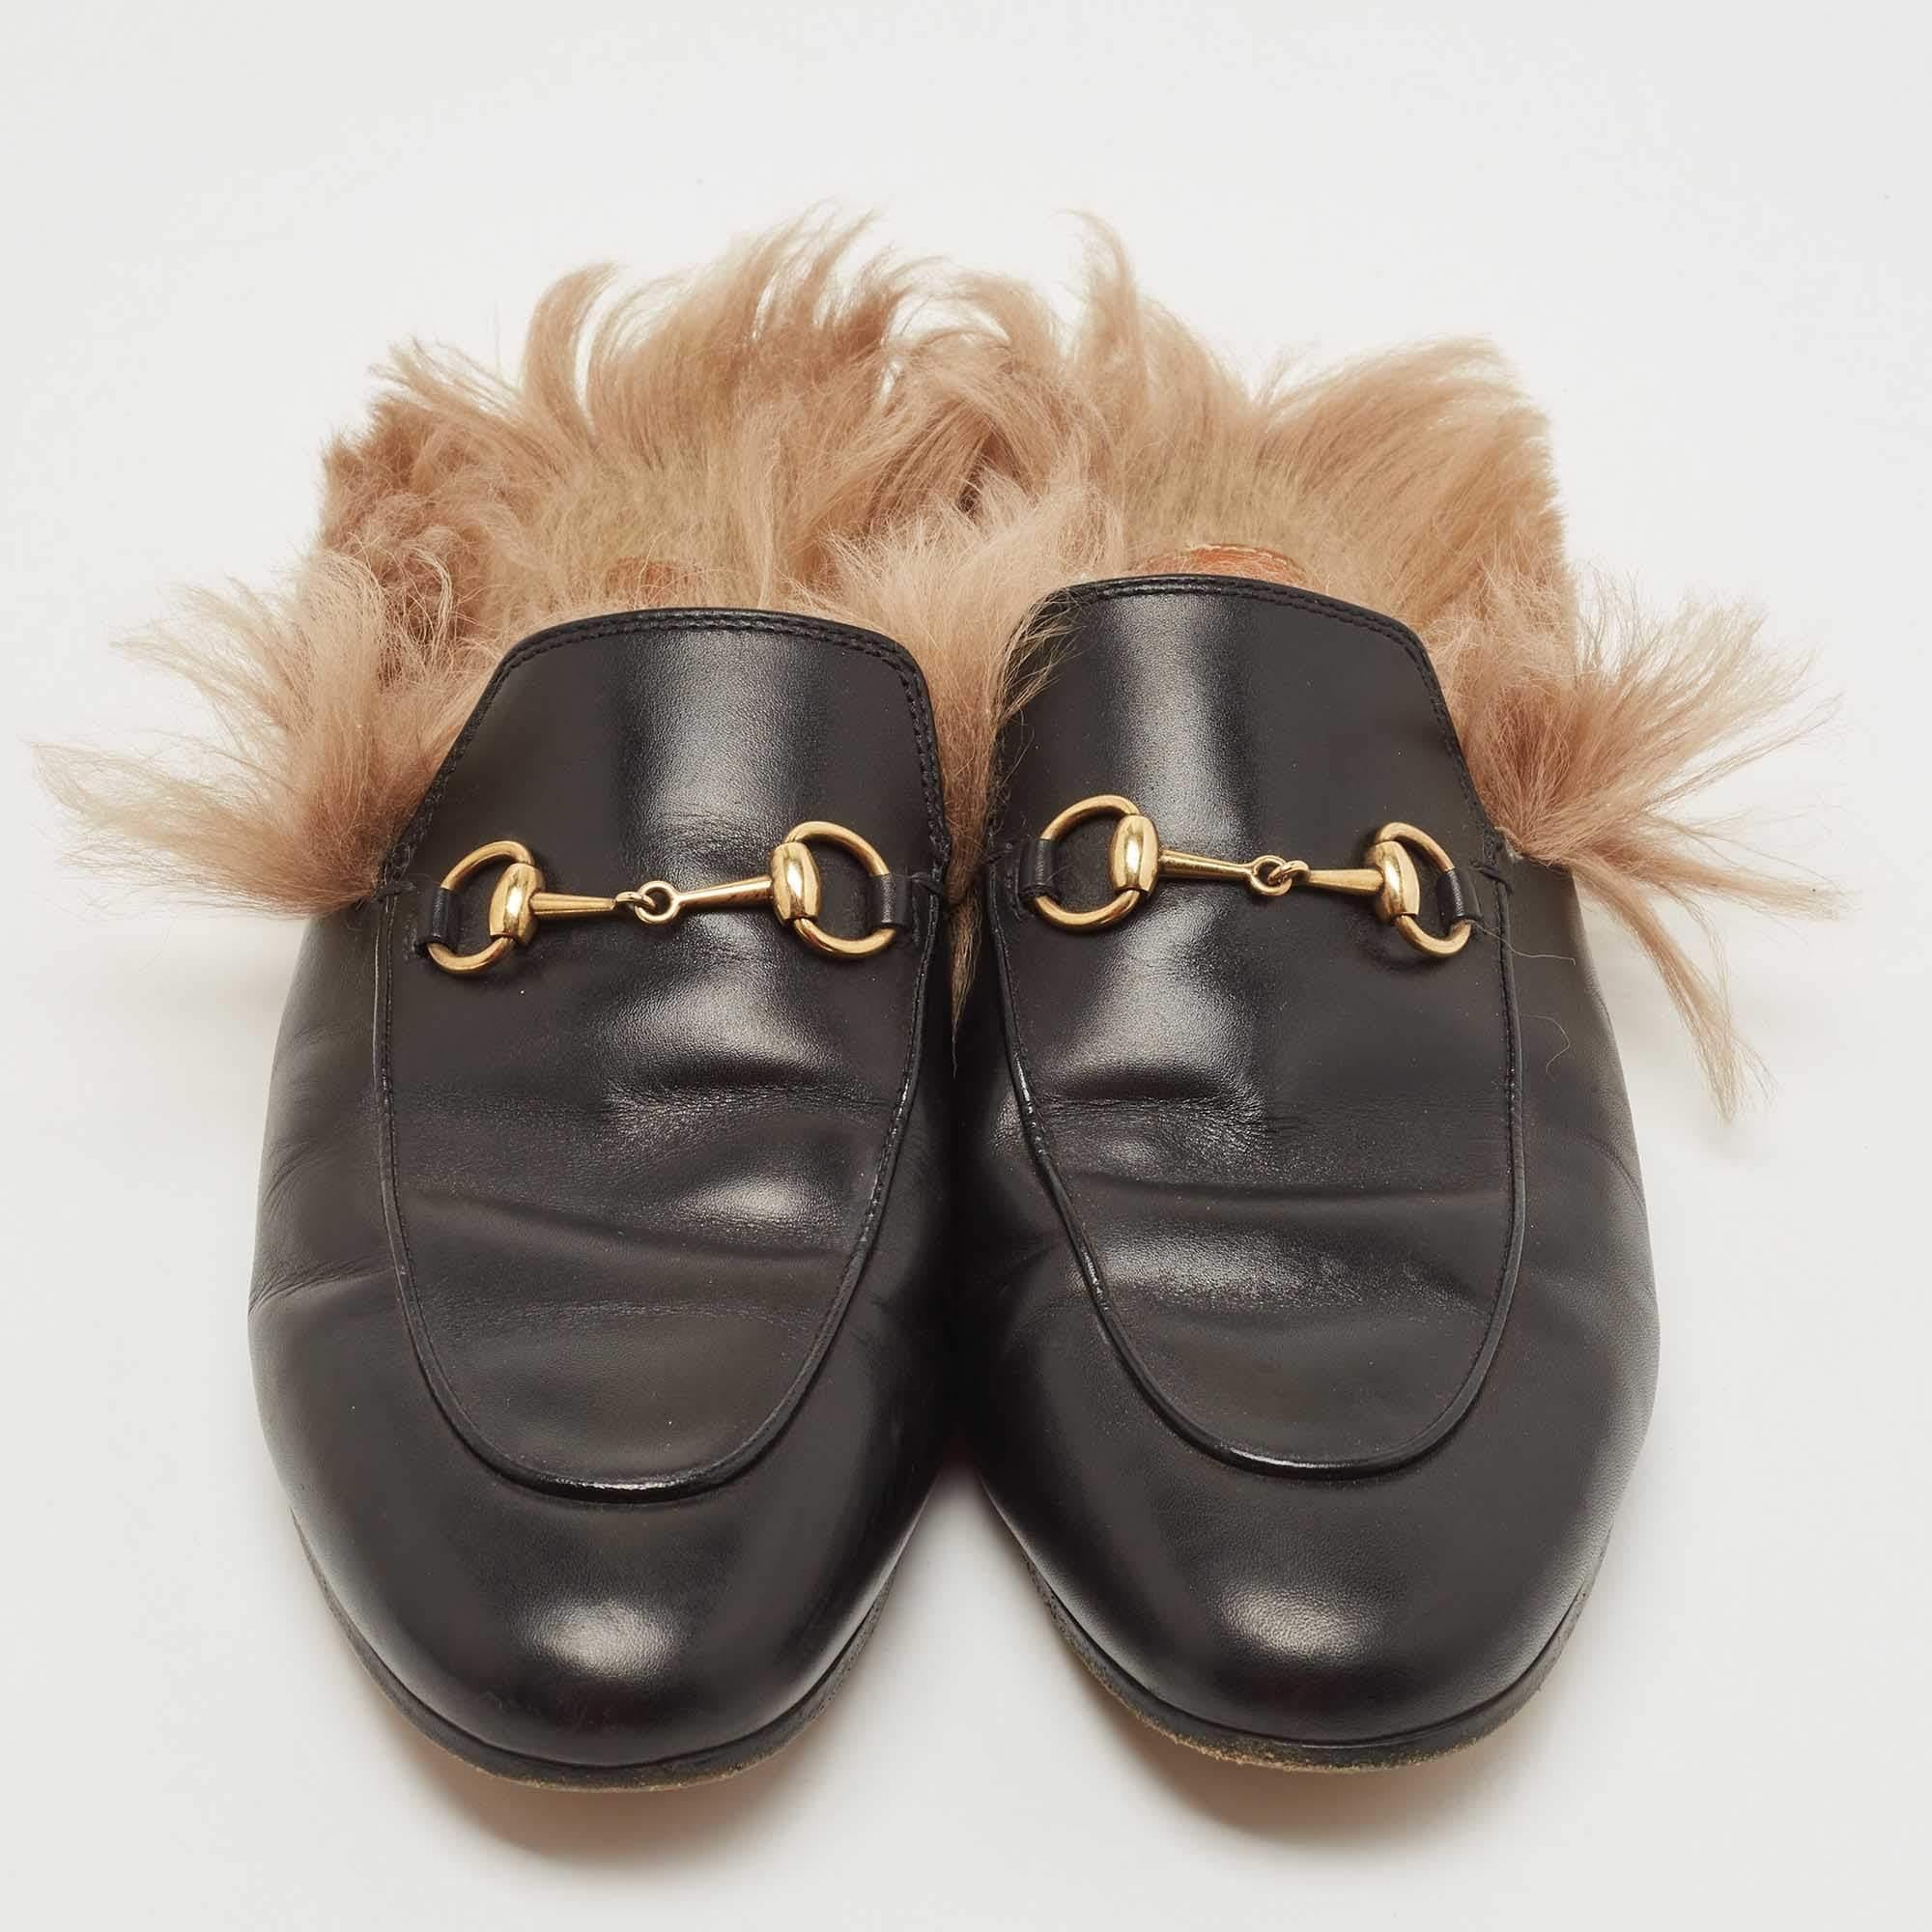 Let this comfortable pair be your first choice when you're out for a long day. These Gucci shoes have well-sewn uppers beautifully set on durable soles.

